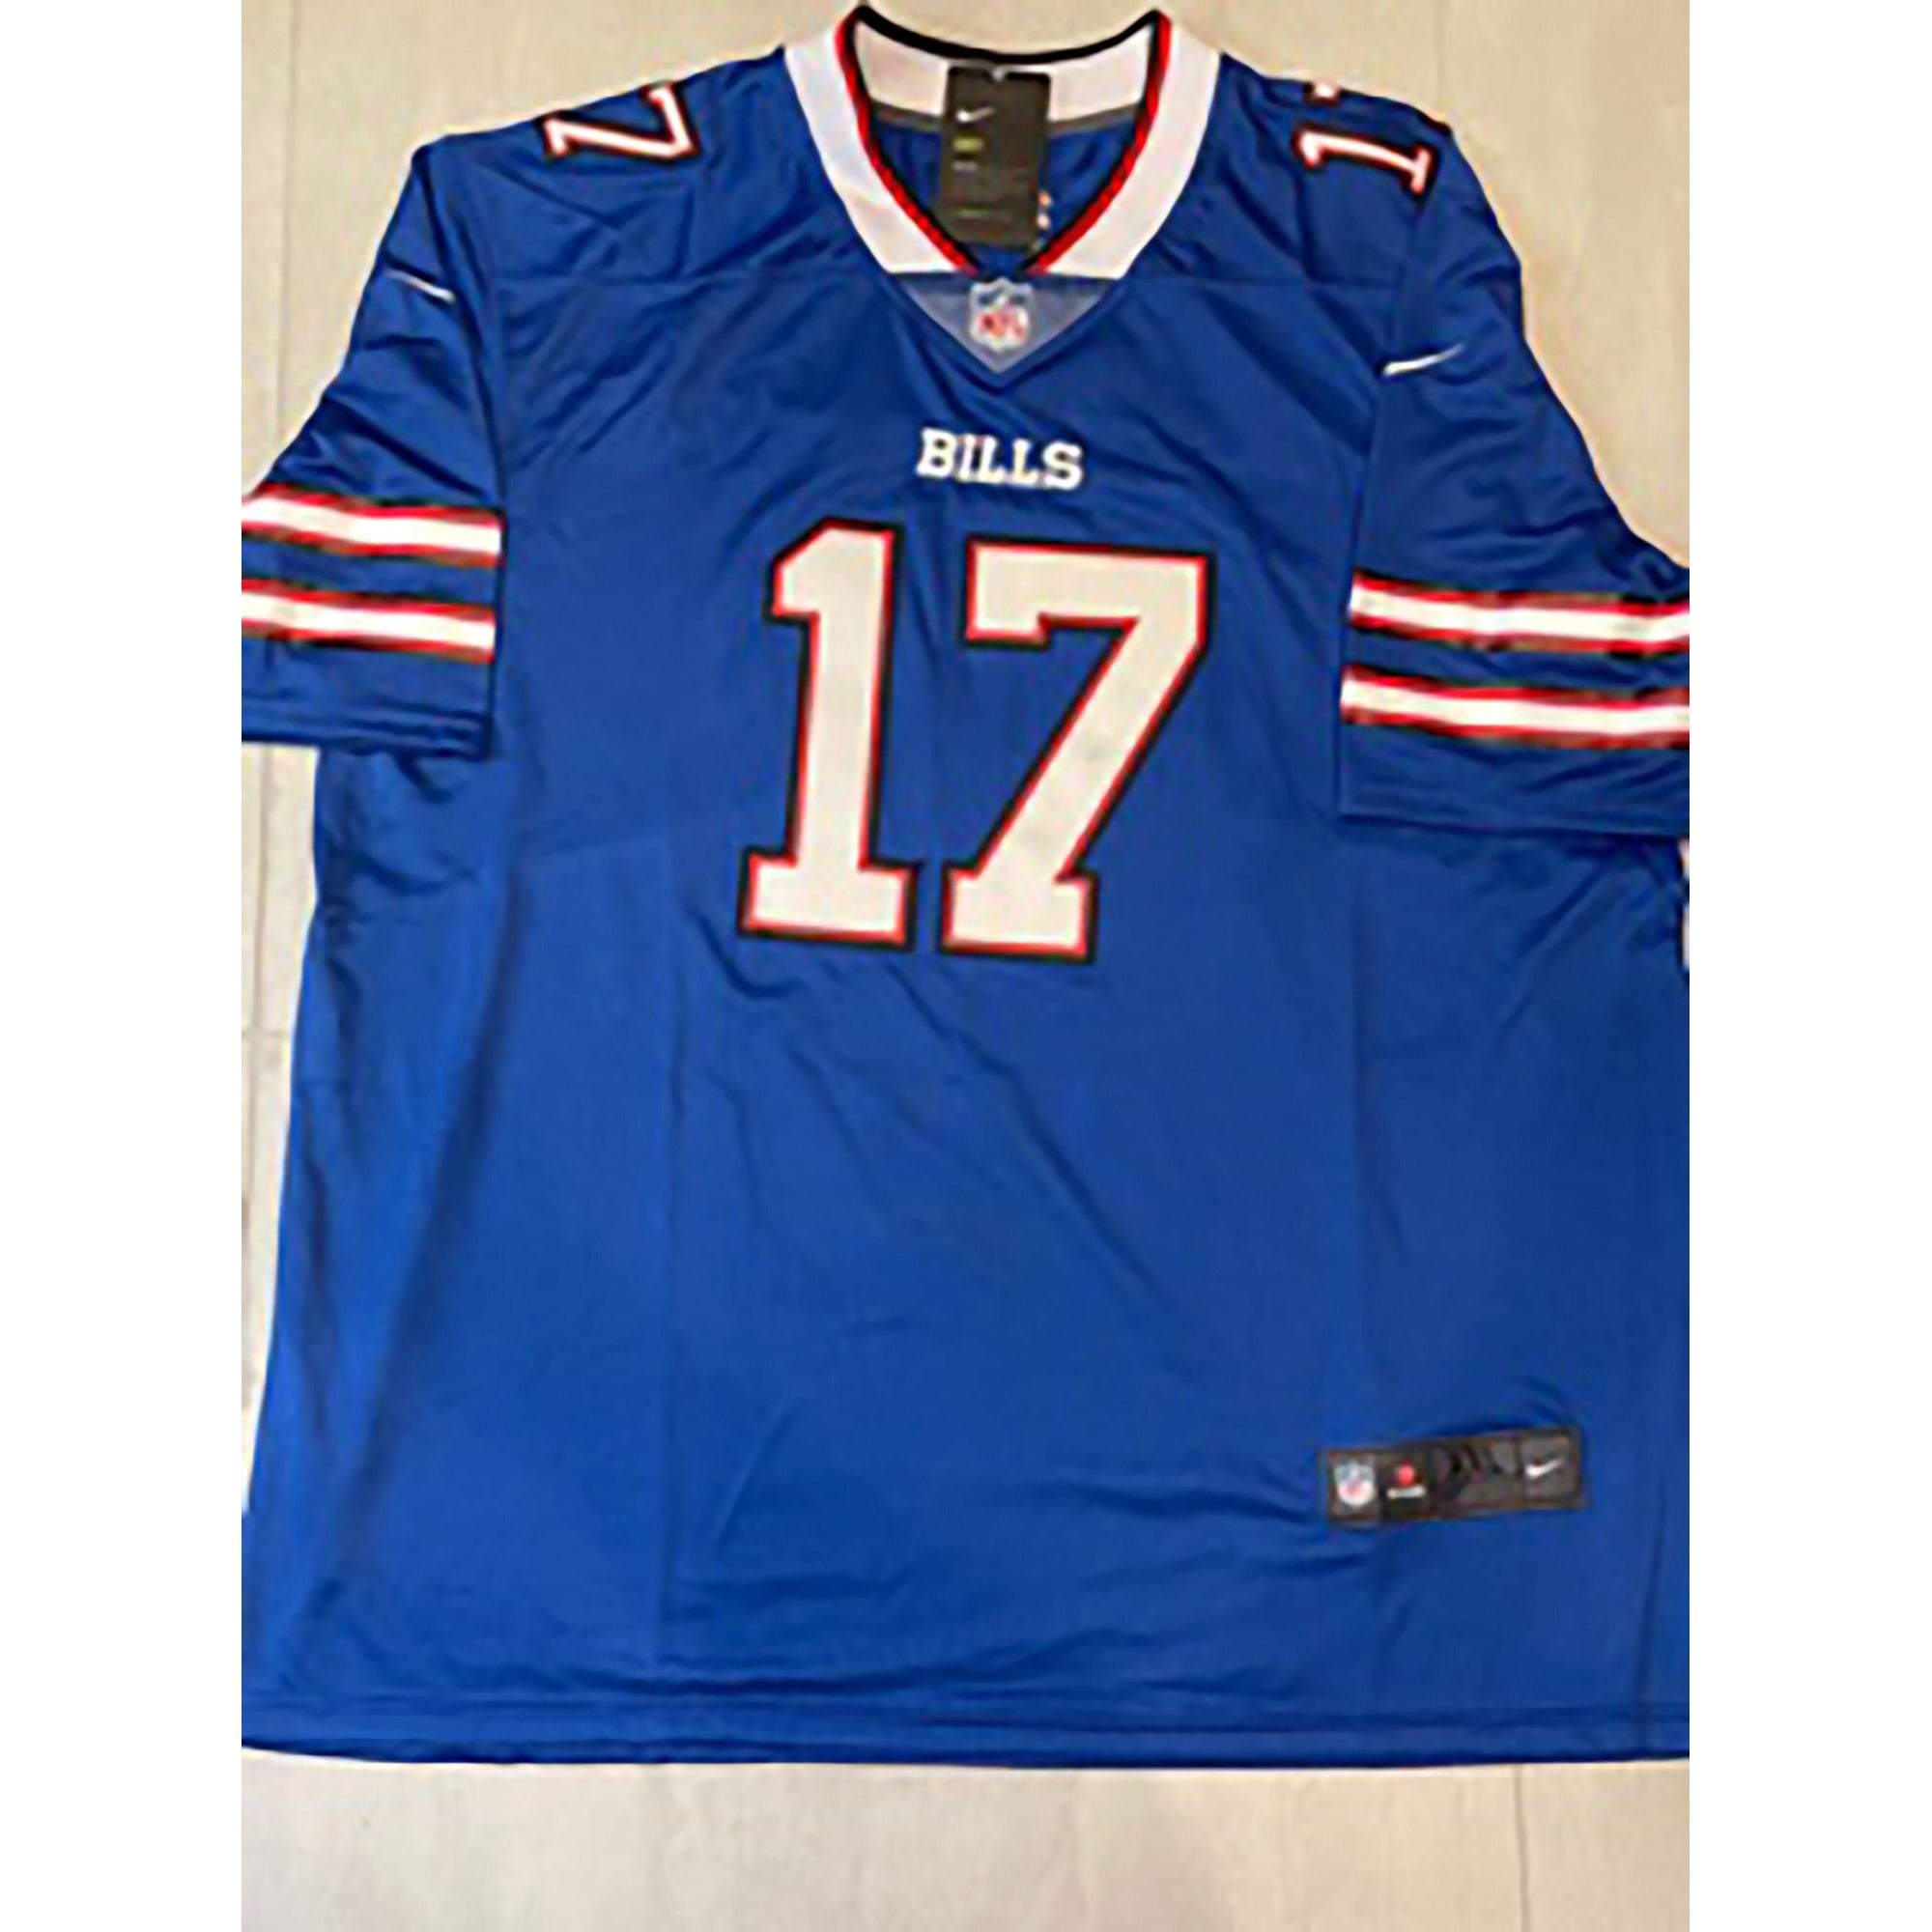 Josh Allen jersey signed with proof